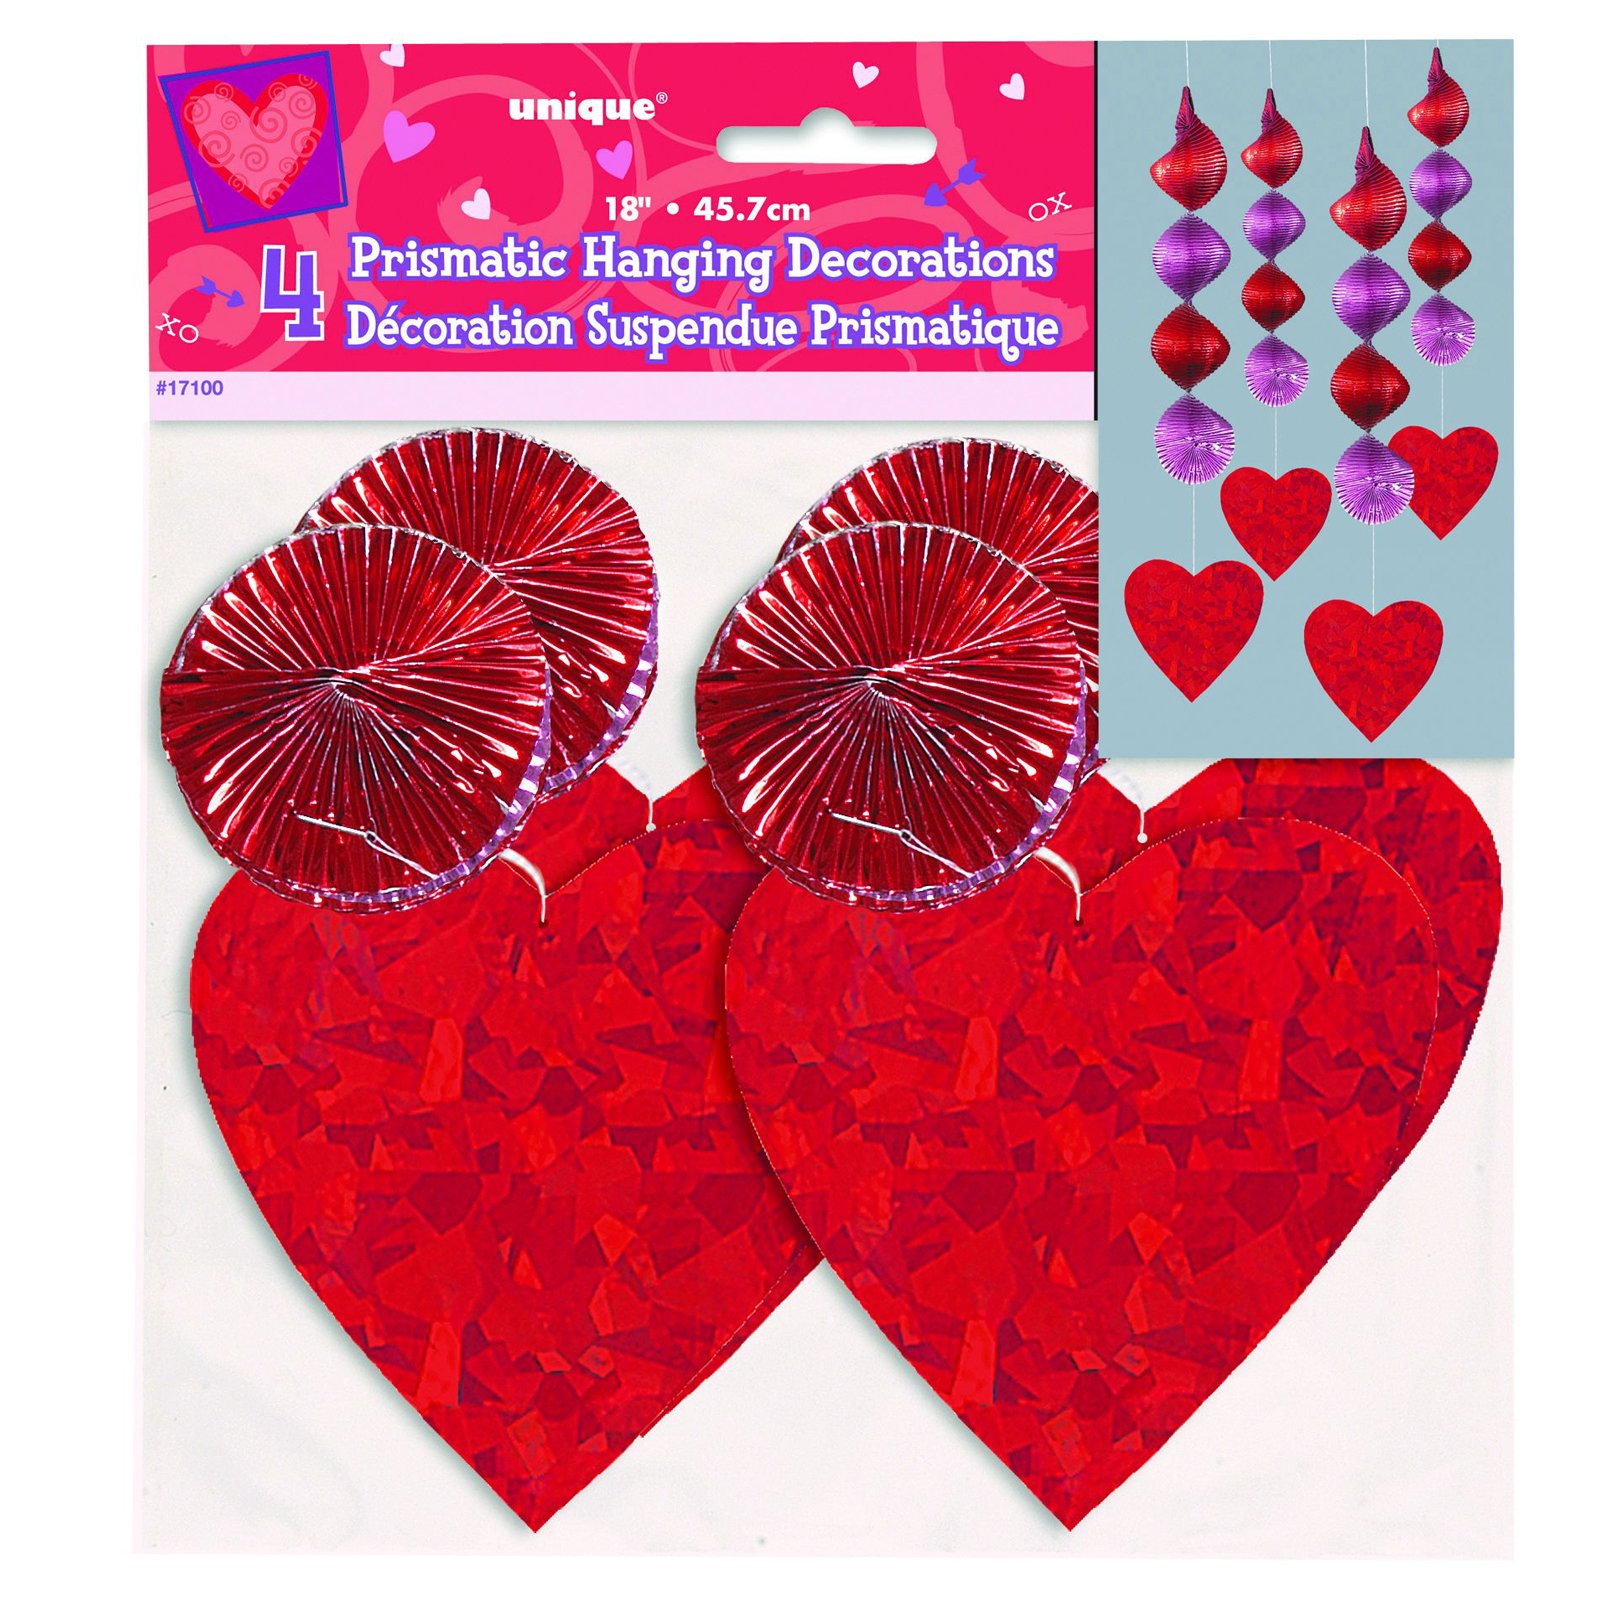 Heart Prismatic Hanging Decorations (4 count)